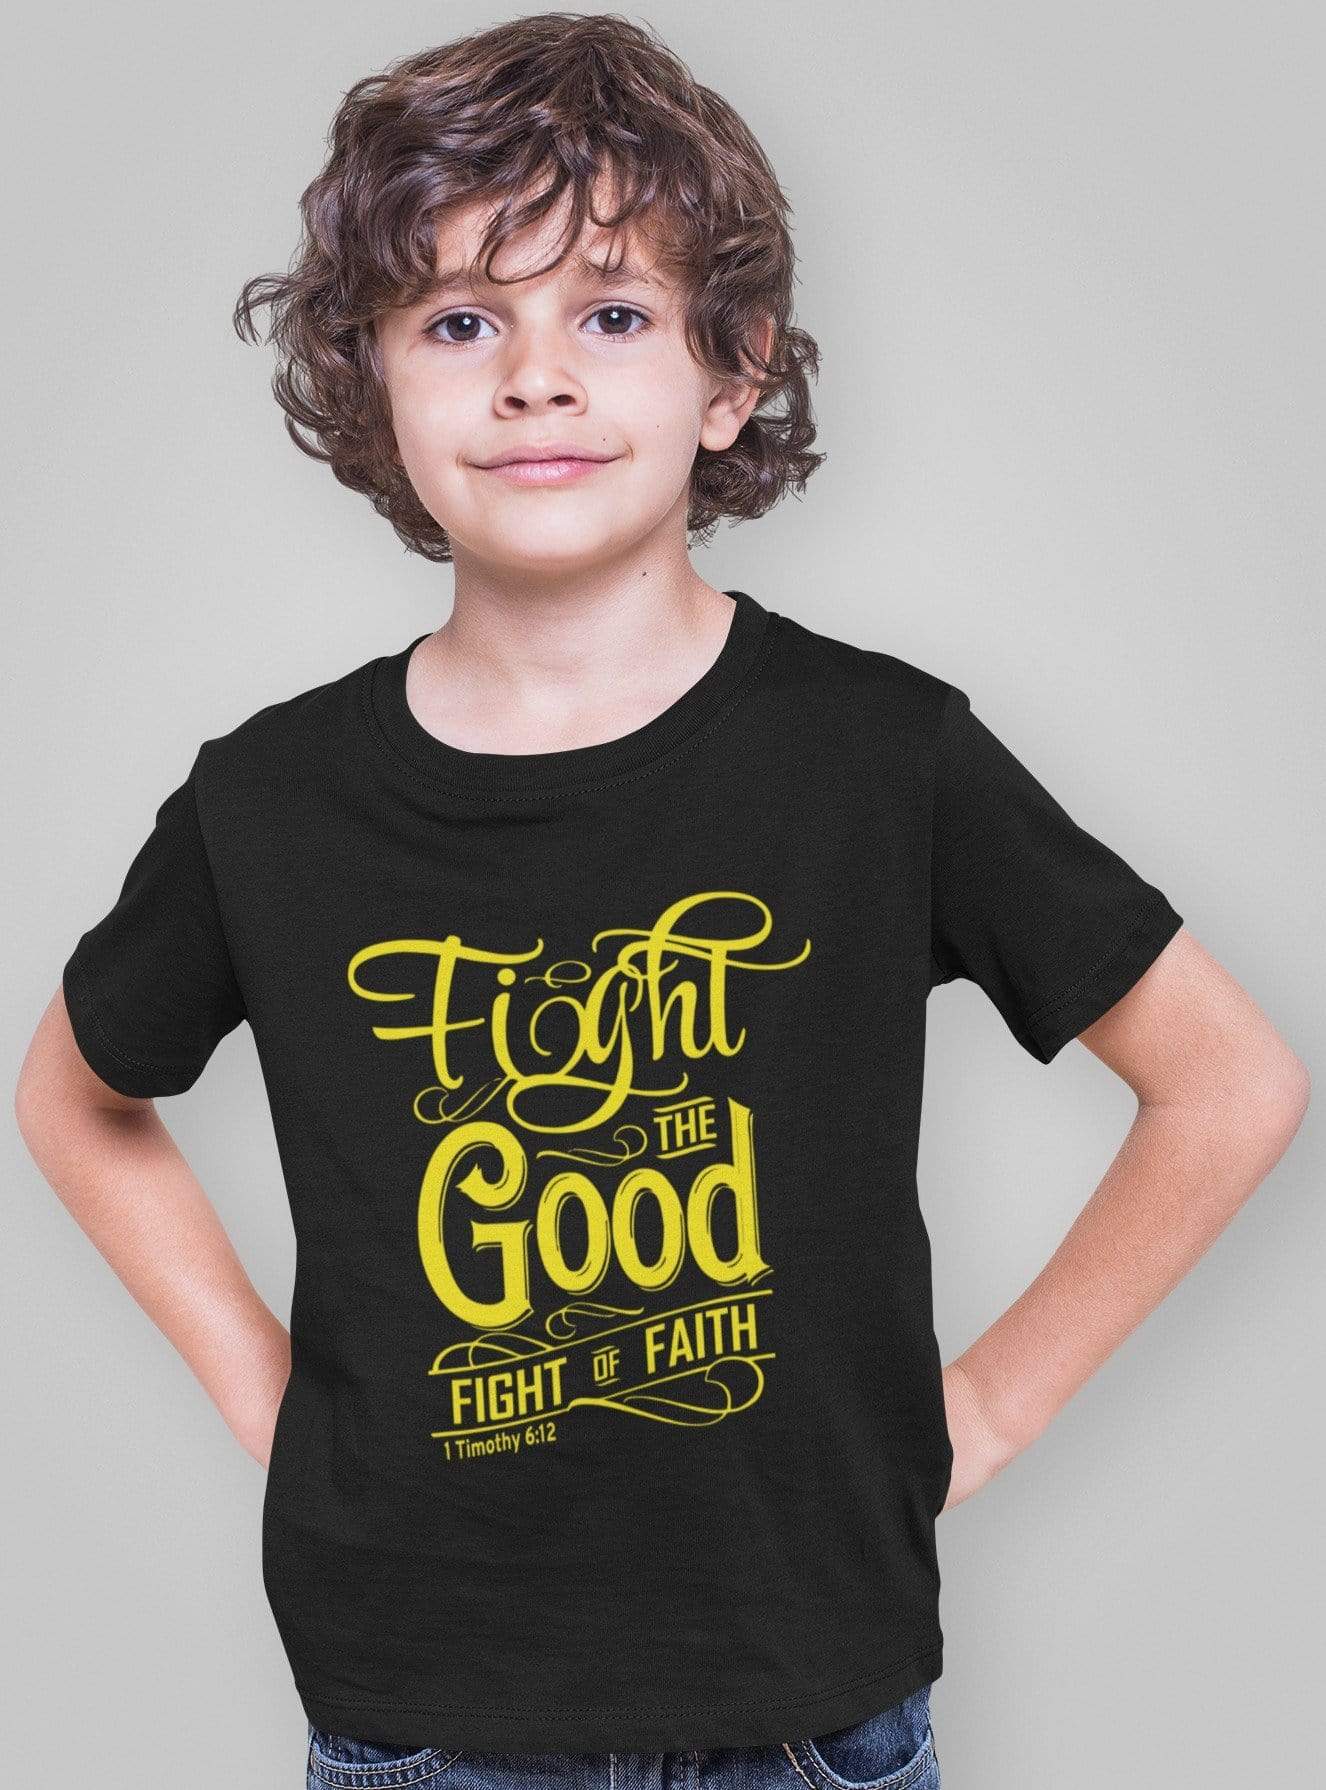 Living Words Kids Round Neck T Shirt Fight the good - Retro